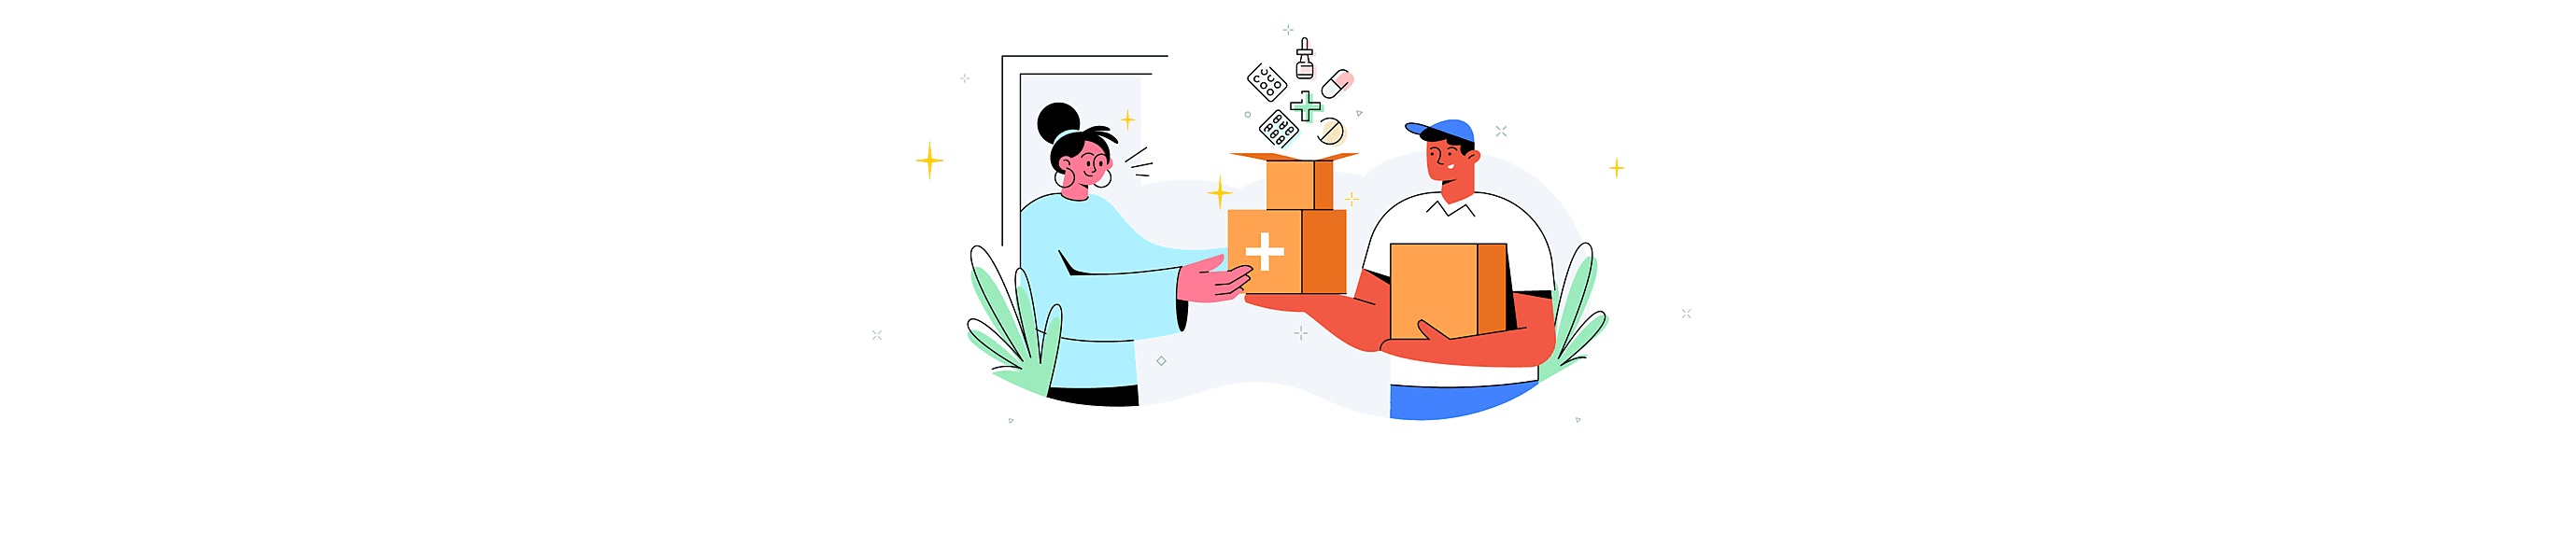 How To Create An On-Demand Medicine Delivery Service Like Capsule or CVS